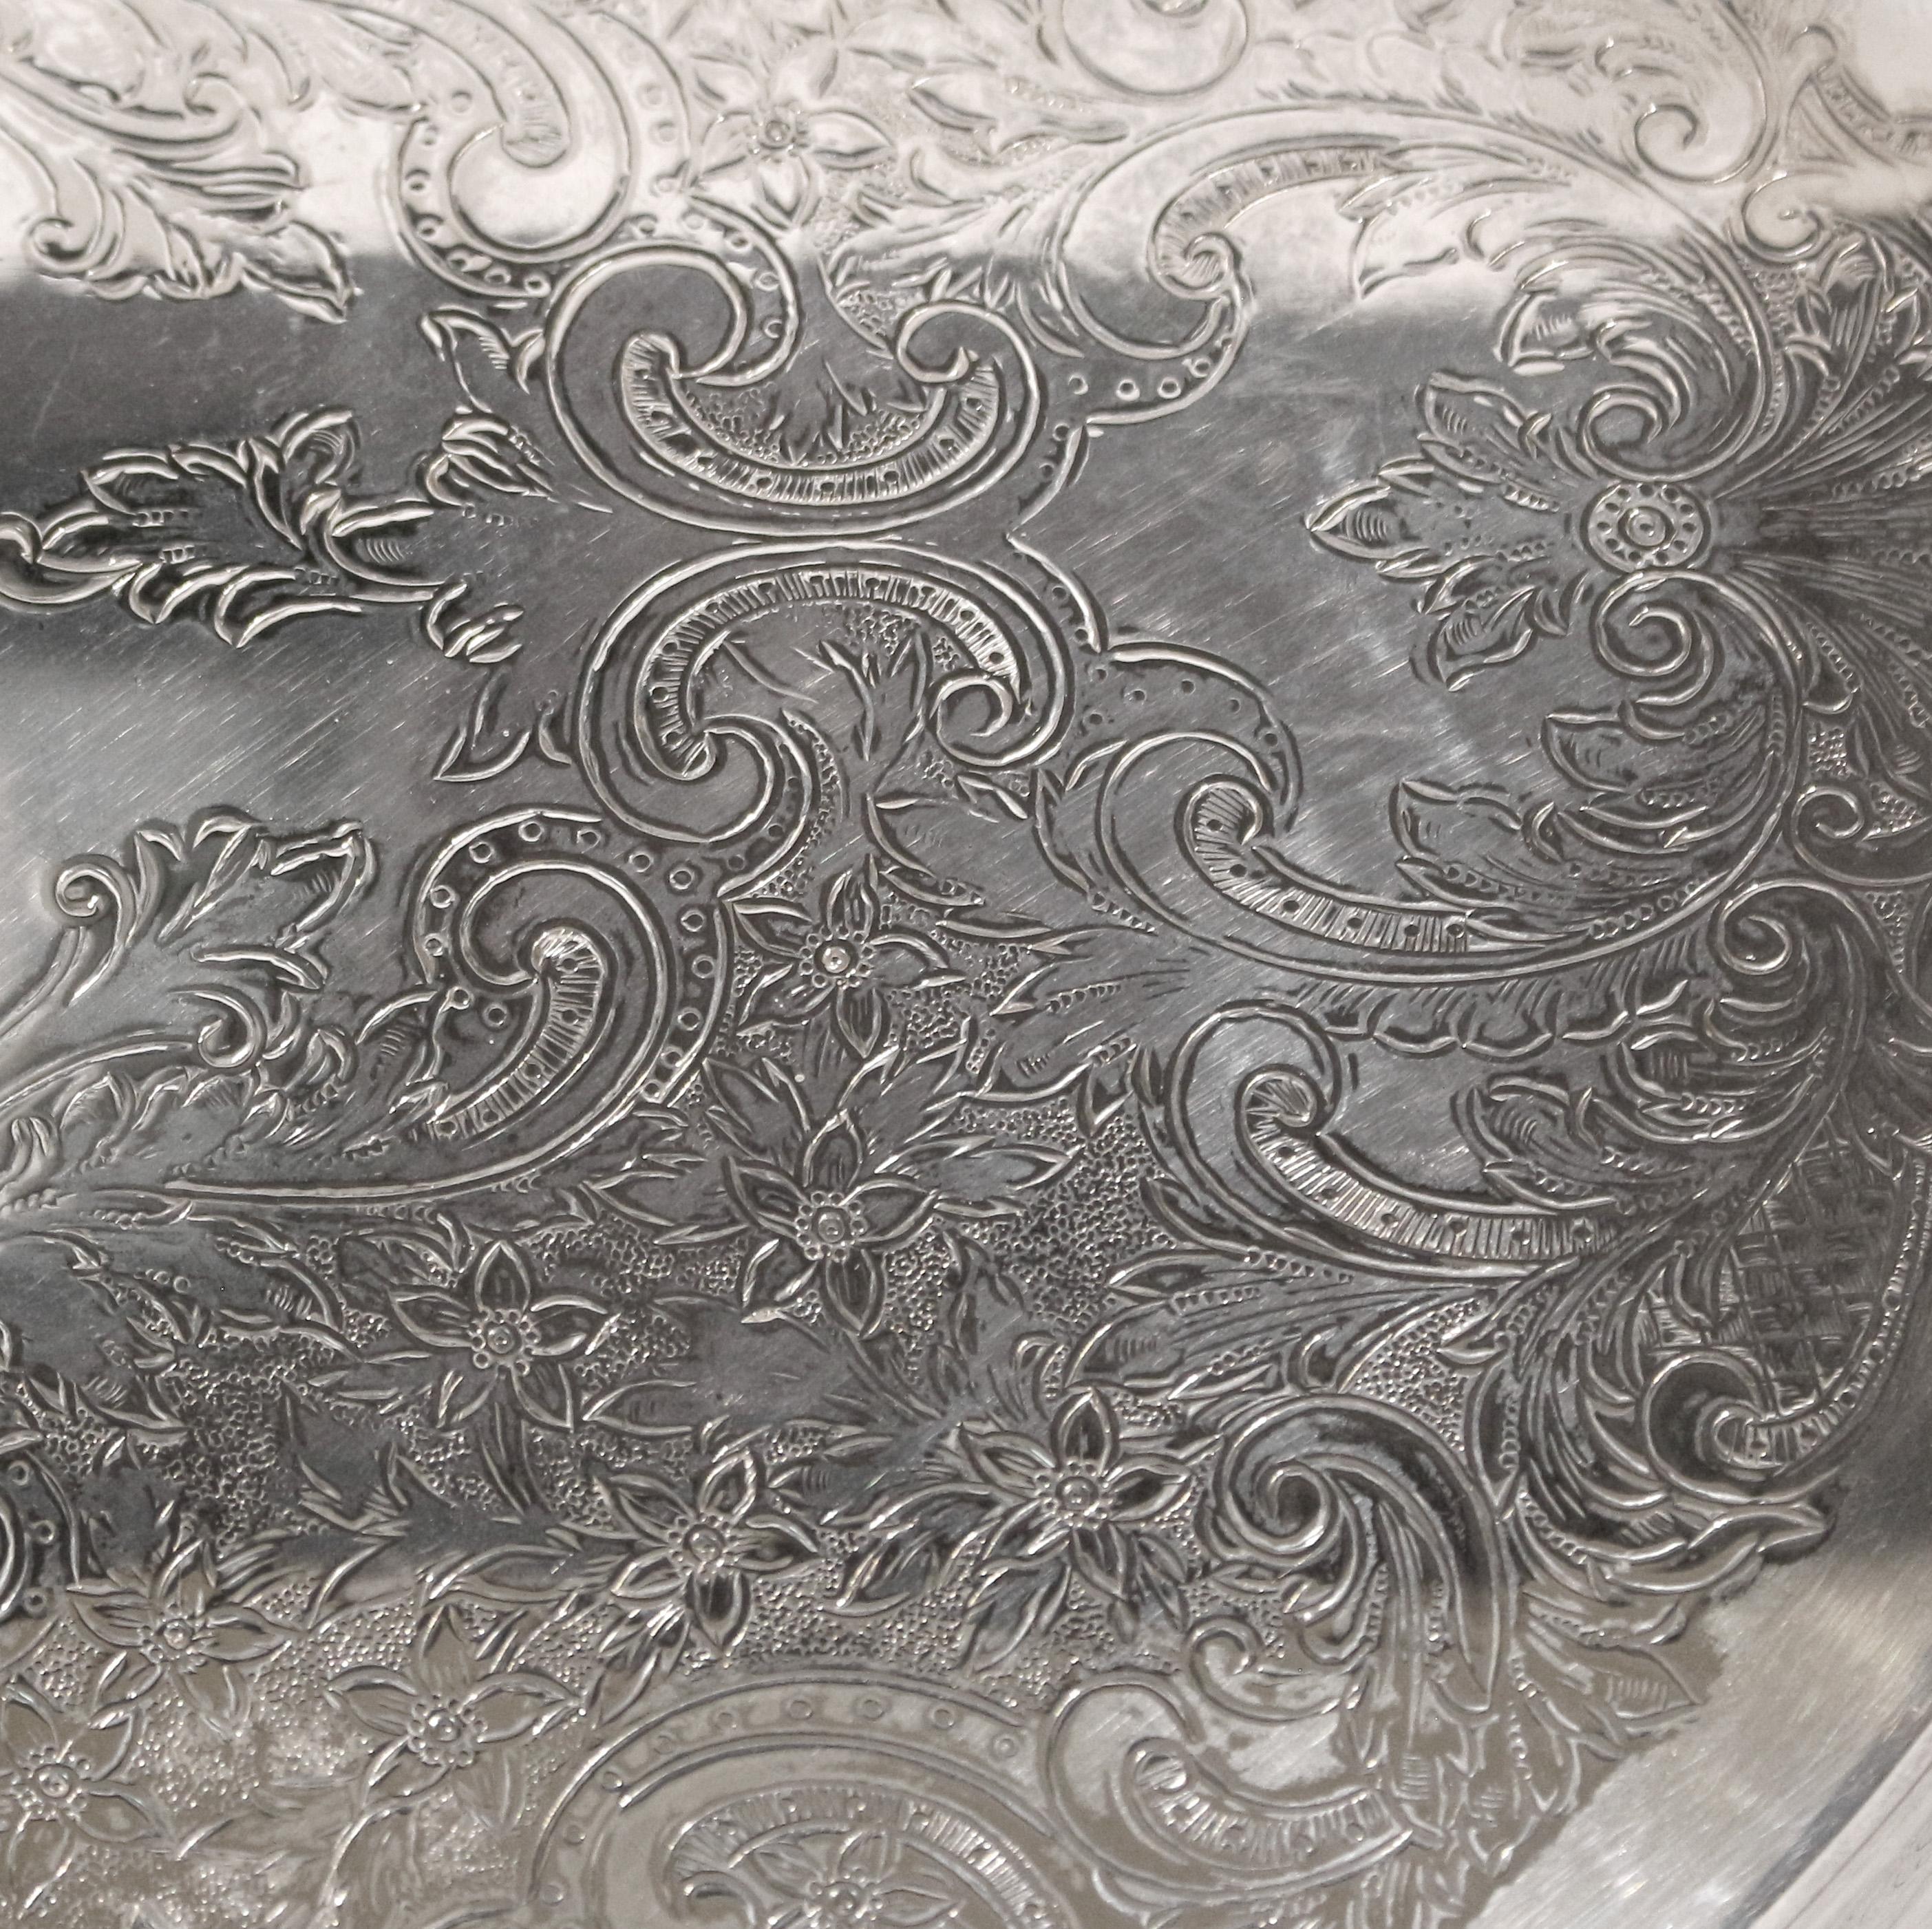 Late 19th to Early 20th Century Rococo-Style Silver Plate Tea Tray by Towle In Good Condition For Sale In Chapel Hill, NC